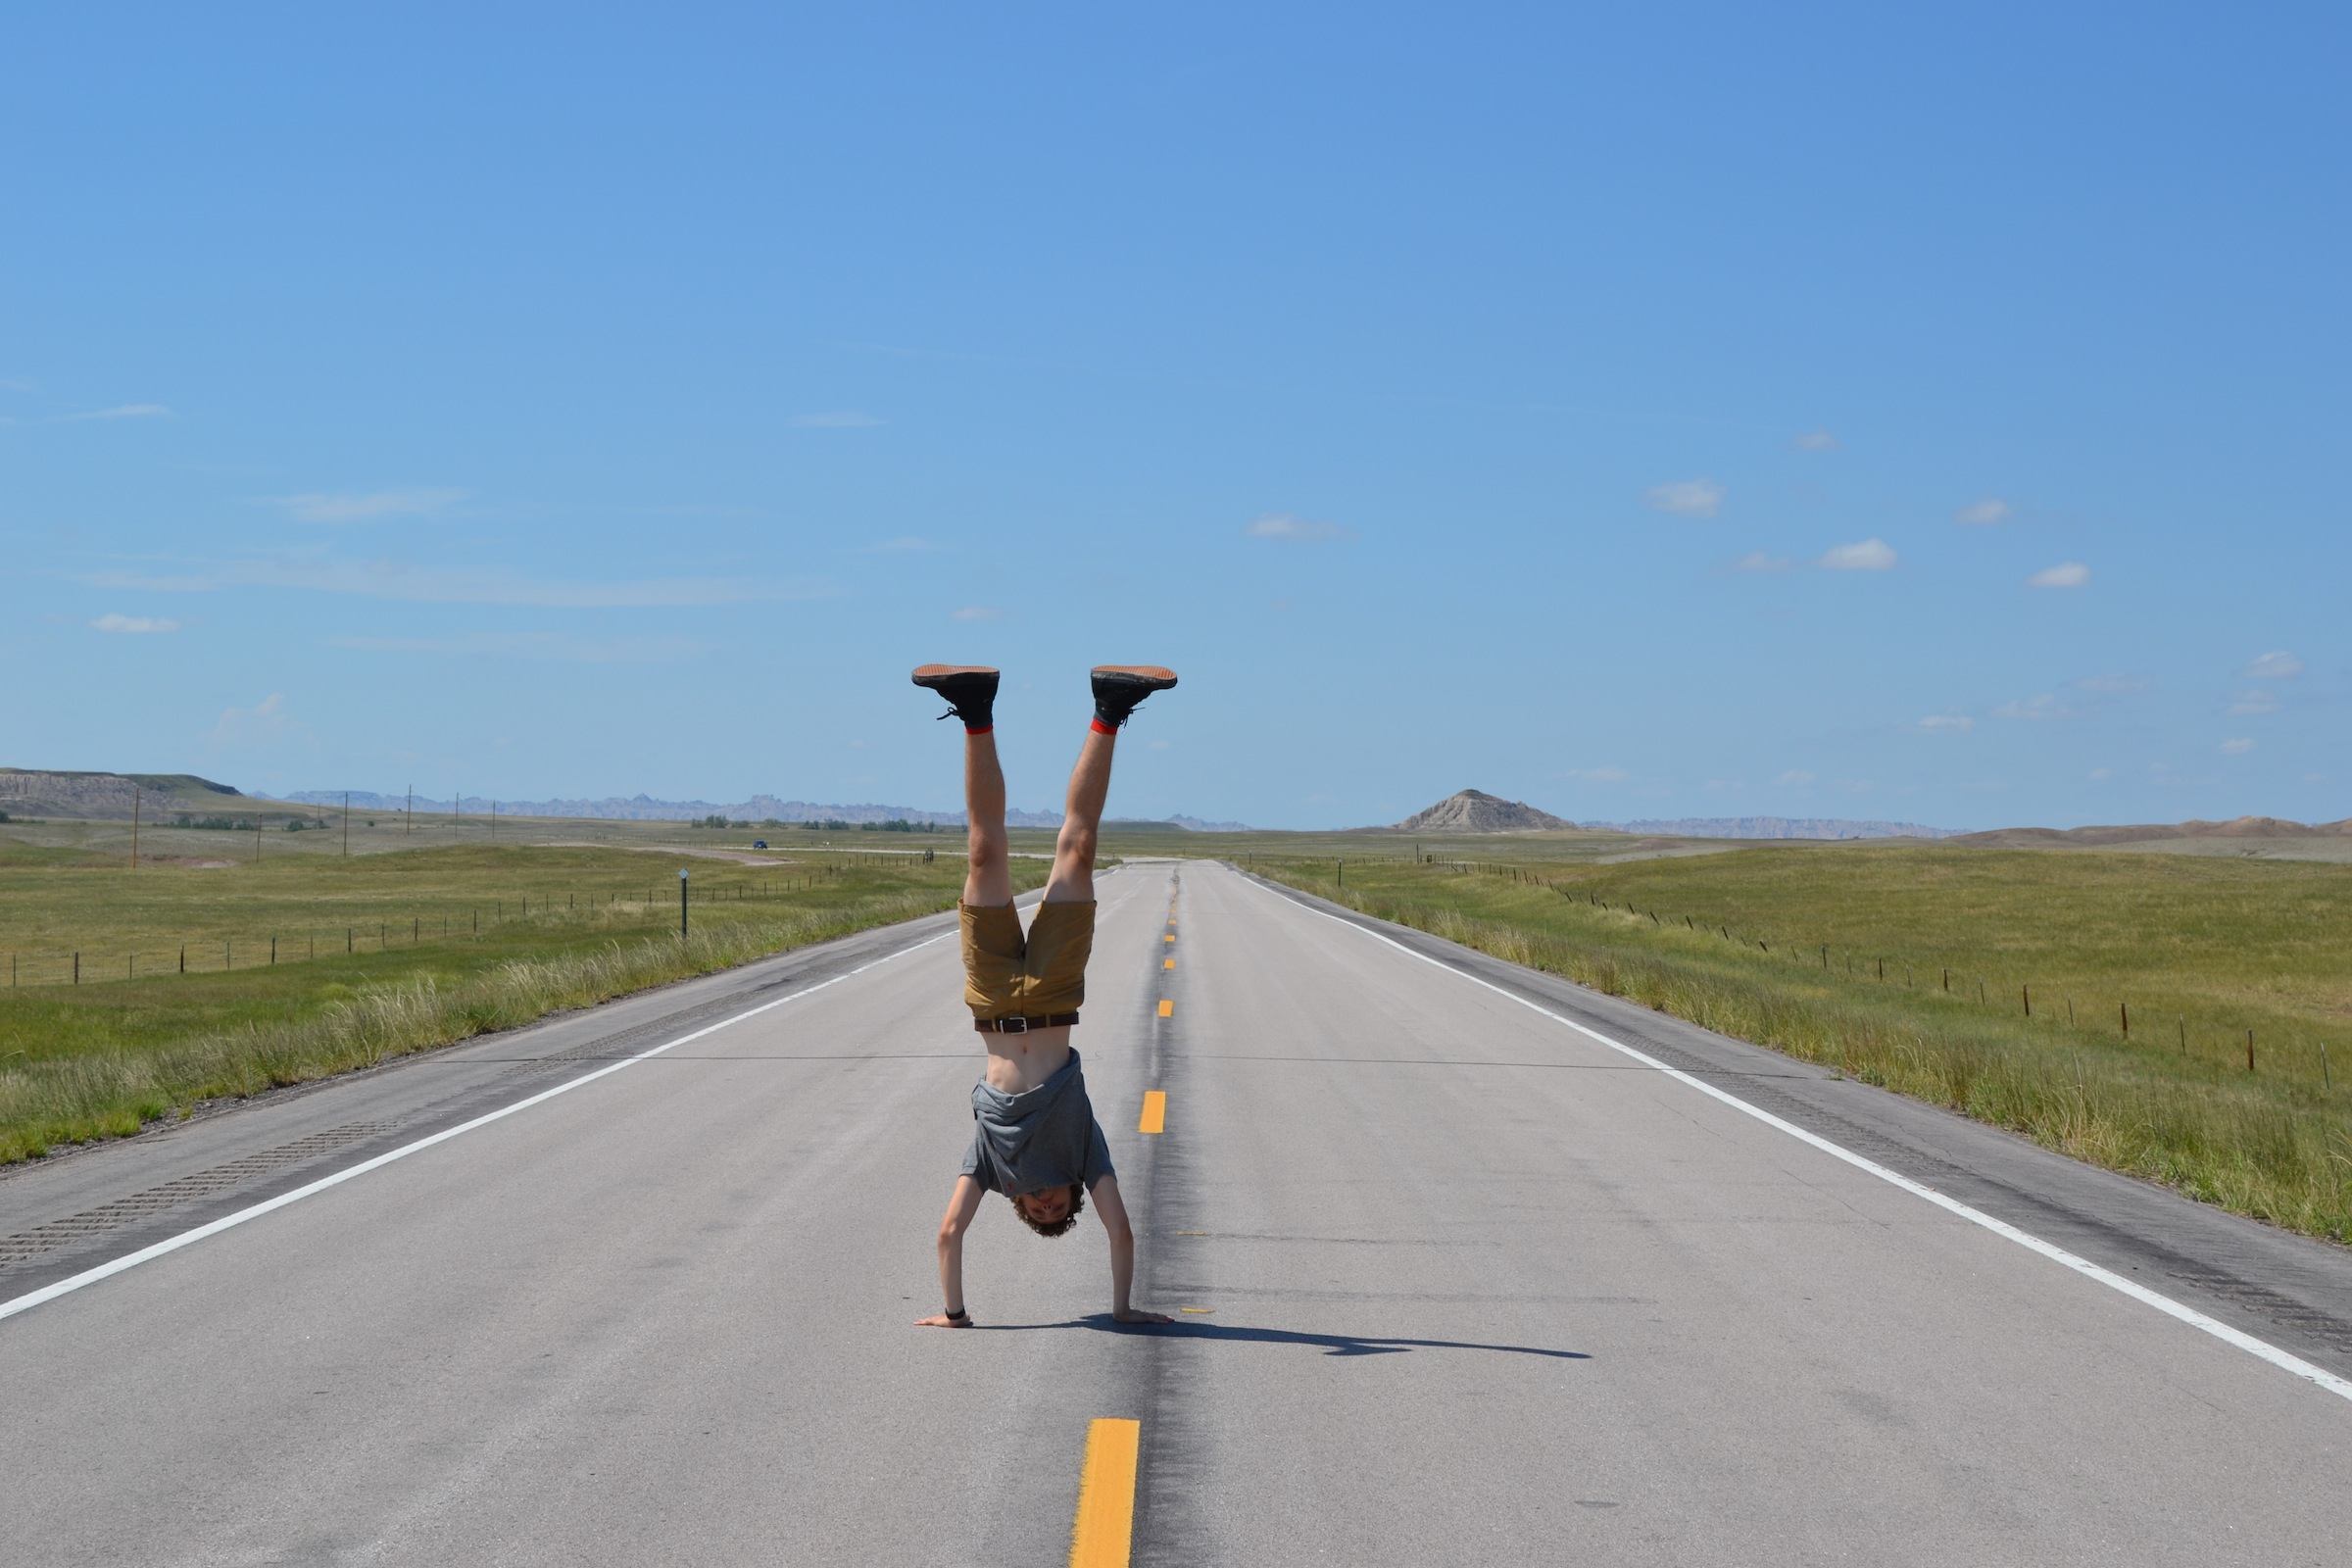 Do a handstand in the middle of the road